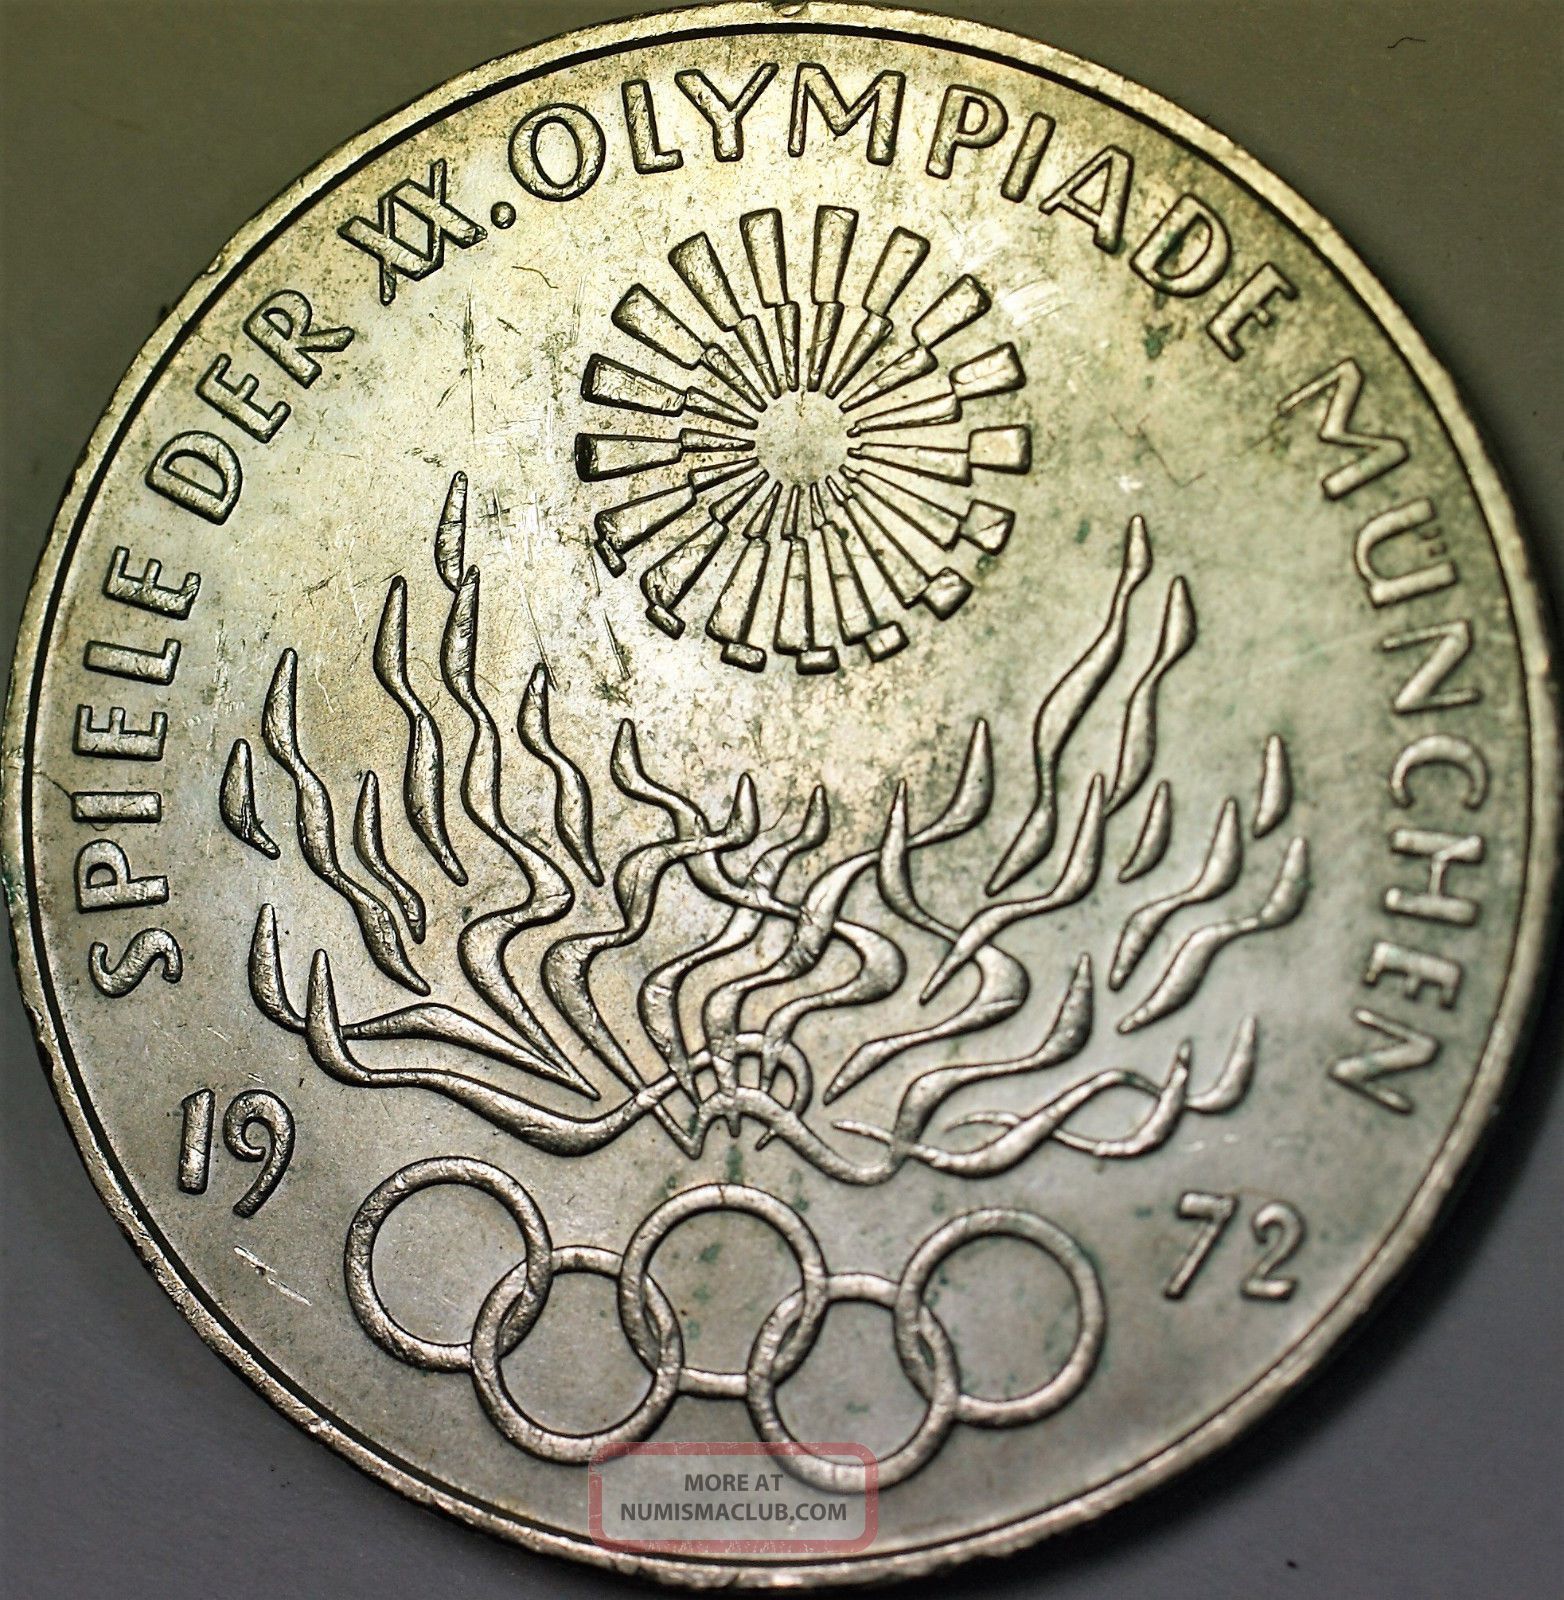 1972 D German 10 Marks Silver Coin Olympic Games Commemorative Flame Spiral Au